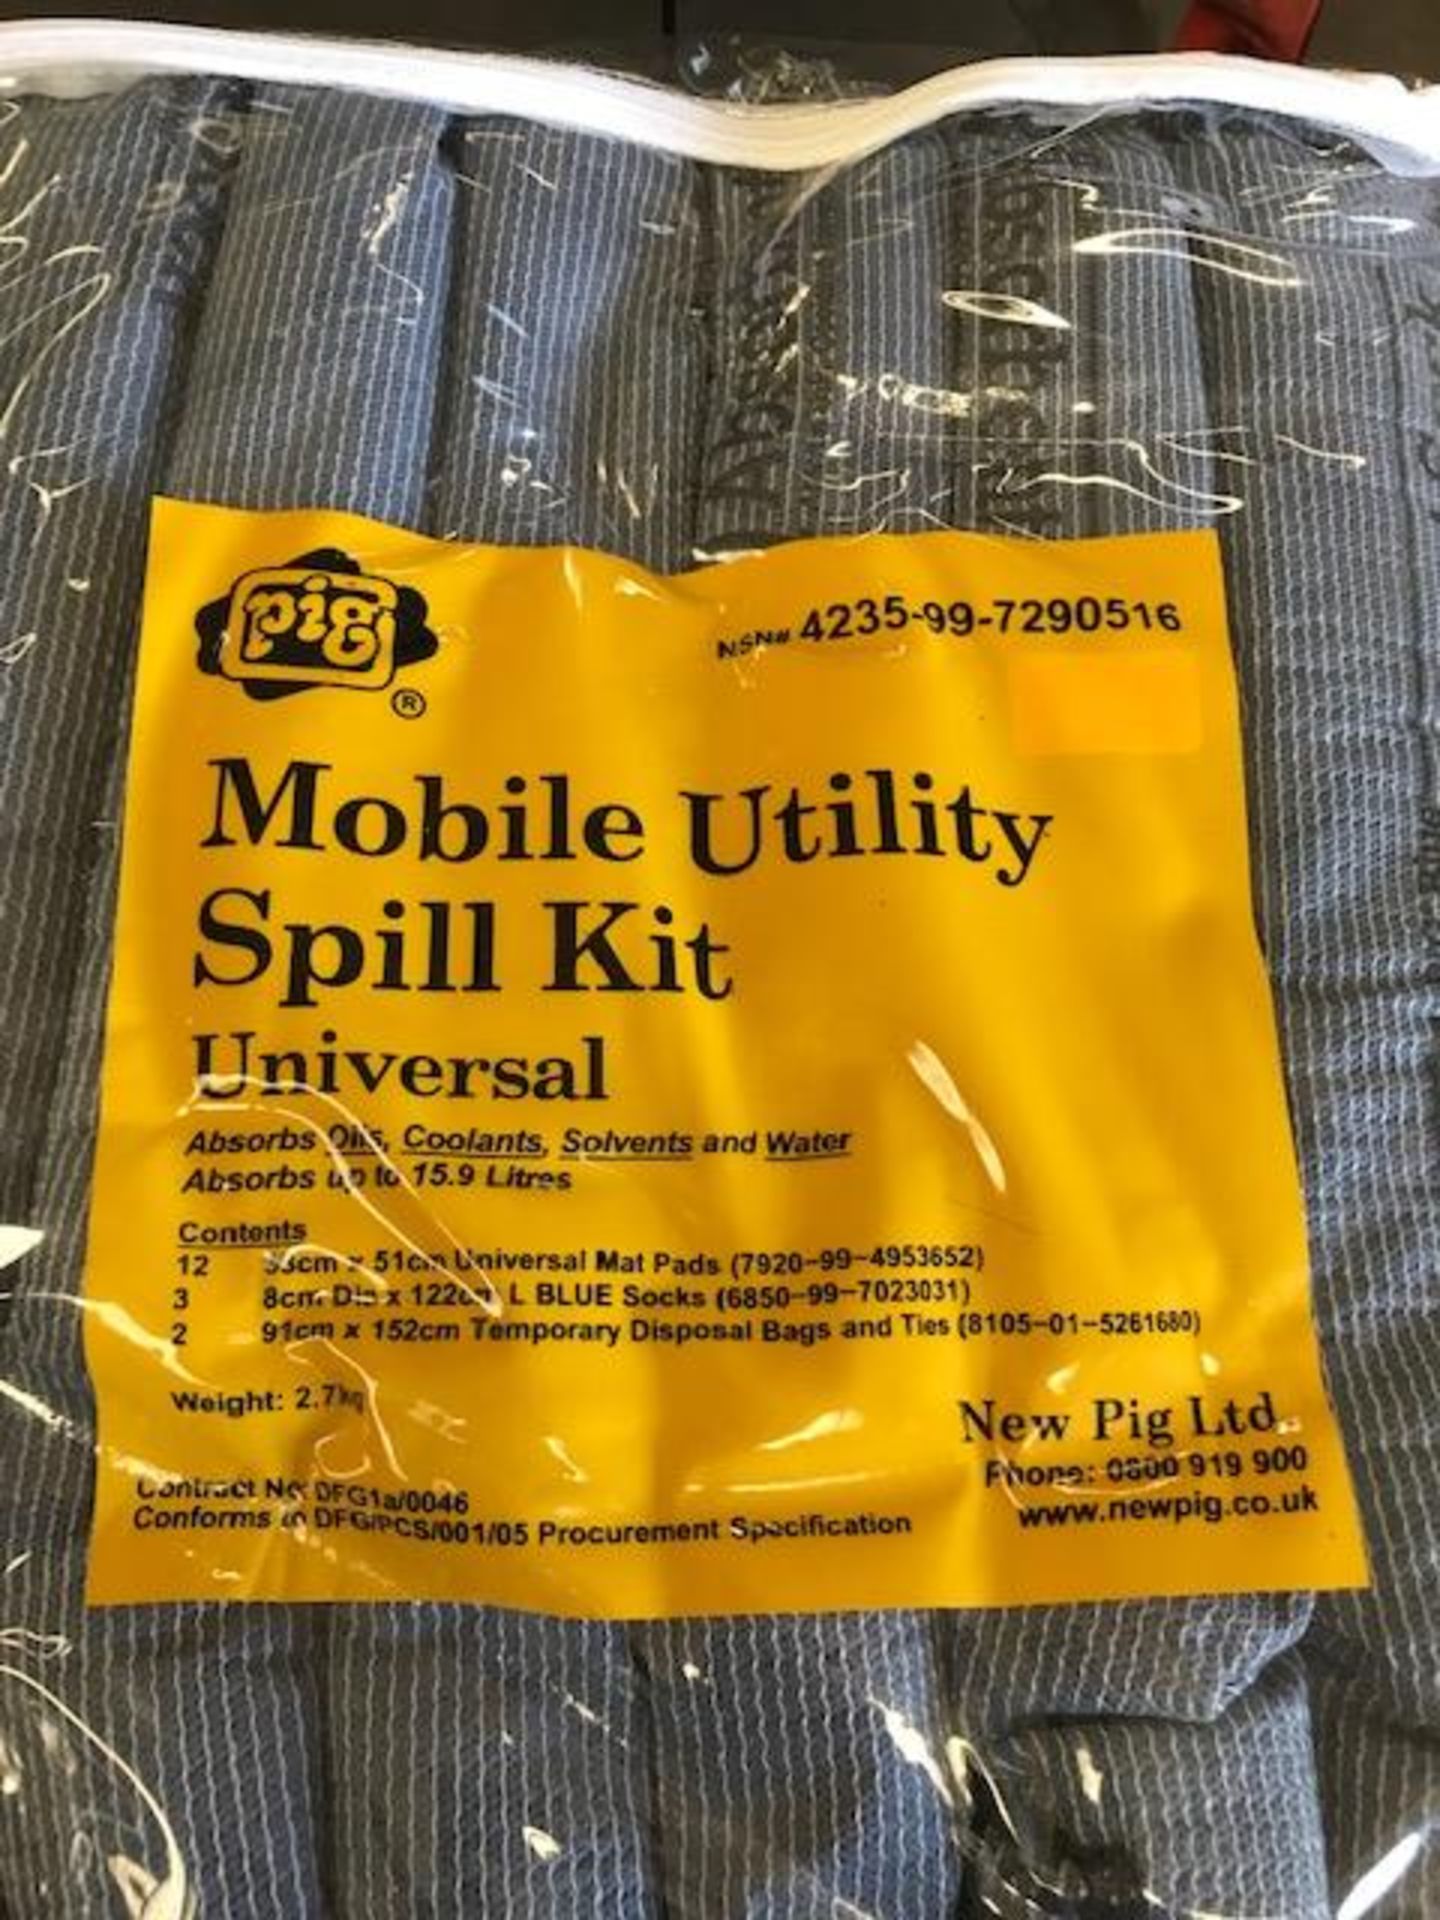 Mobile Utility Spill Kit Unissued and 2 x 5000 KGS Lifting Slings - Image 2 of 3